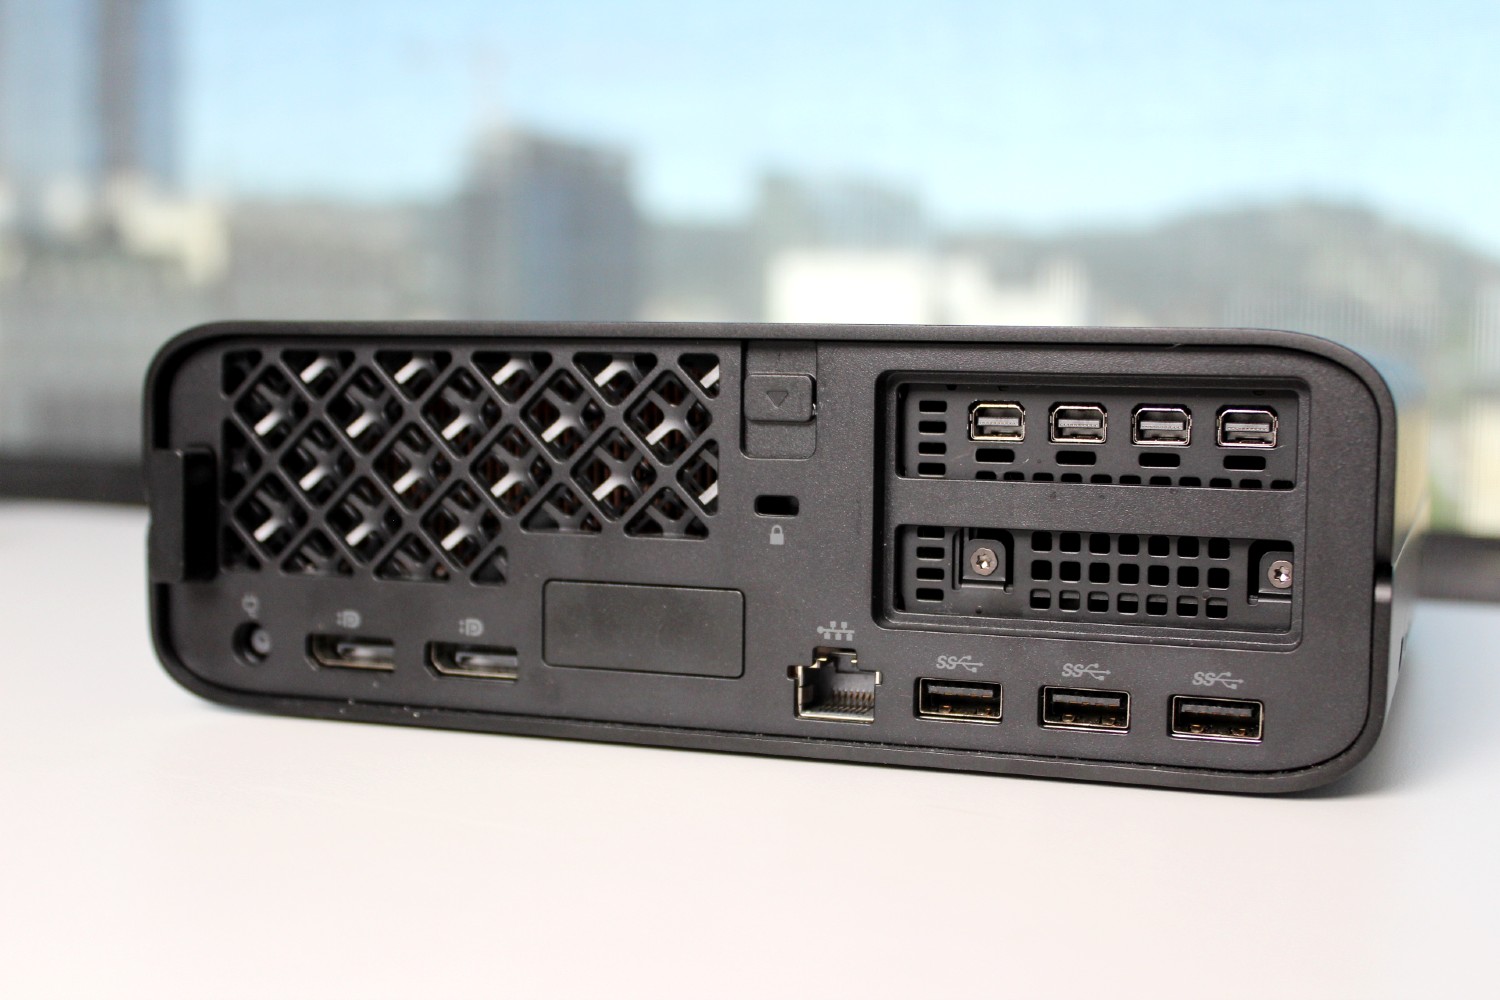 The ports on the back of the HP Z2 G9 Workstation.